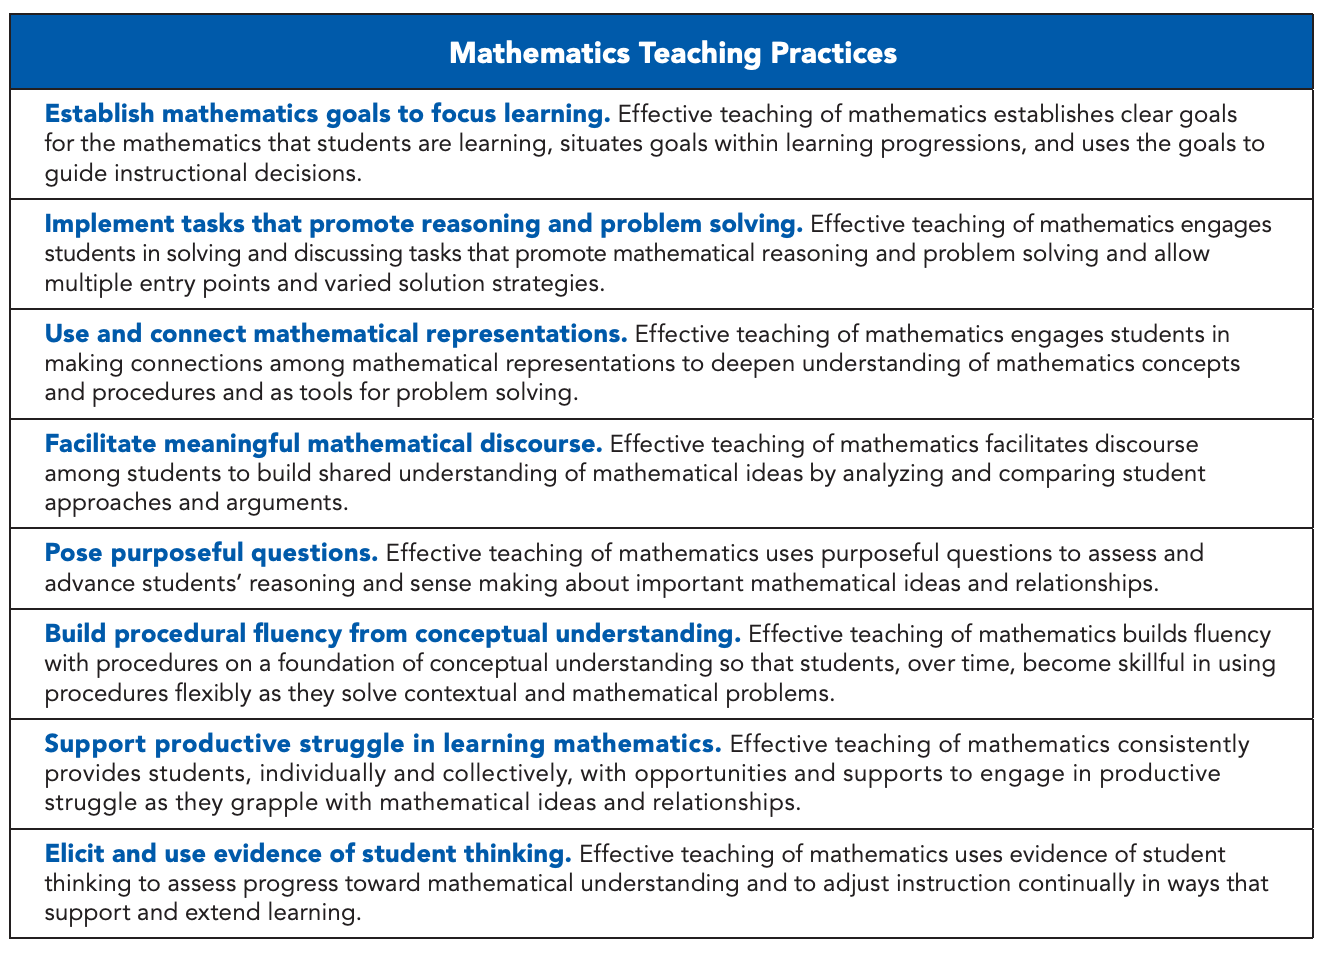 A table listing the eight mathematical teaching practices, which you can access at the link above.